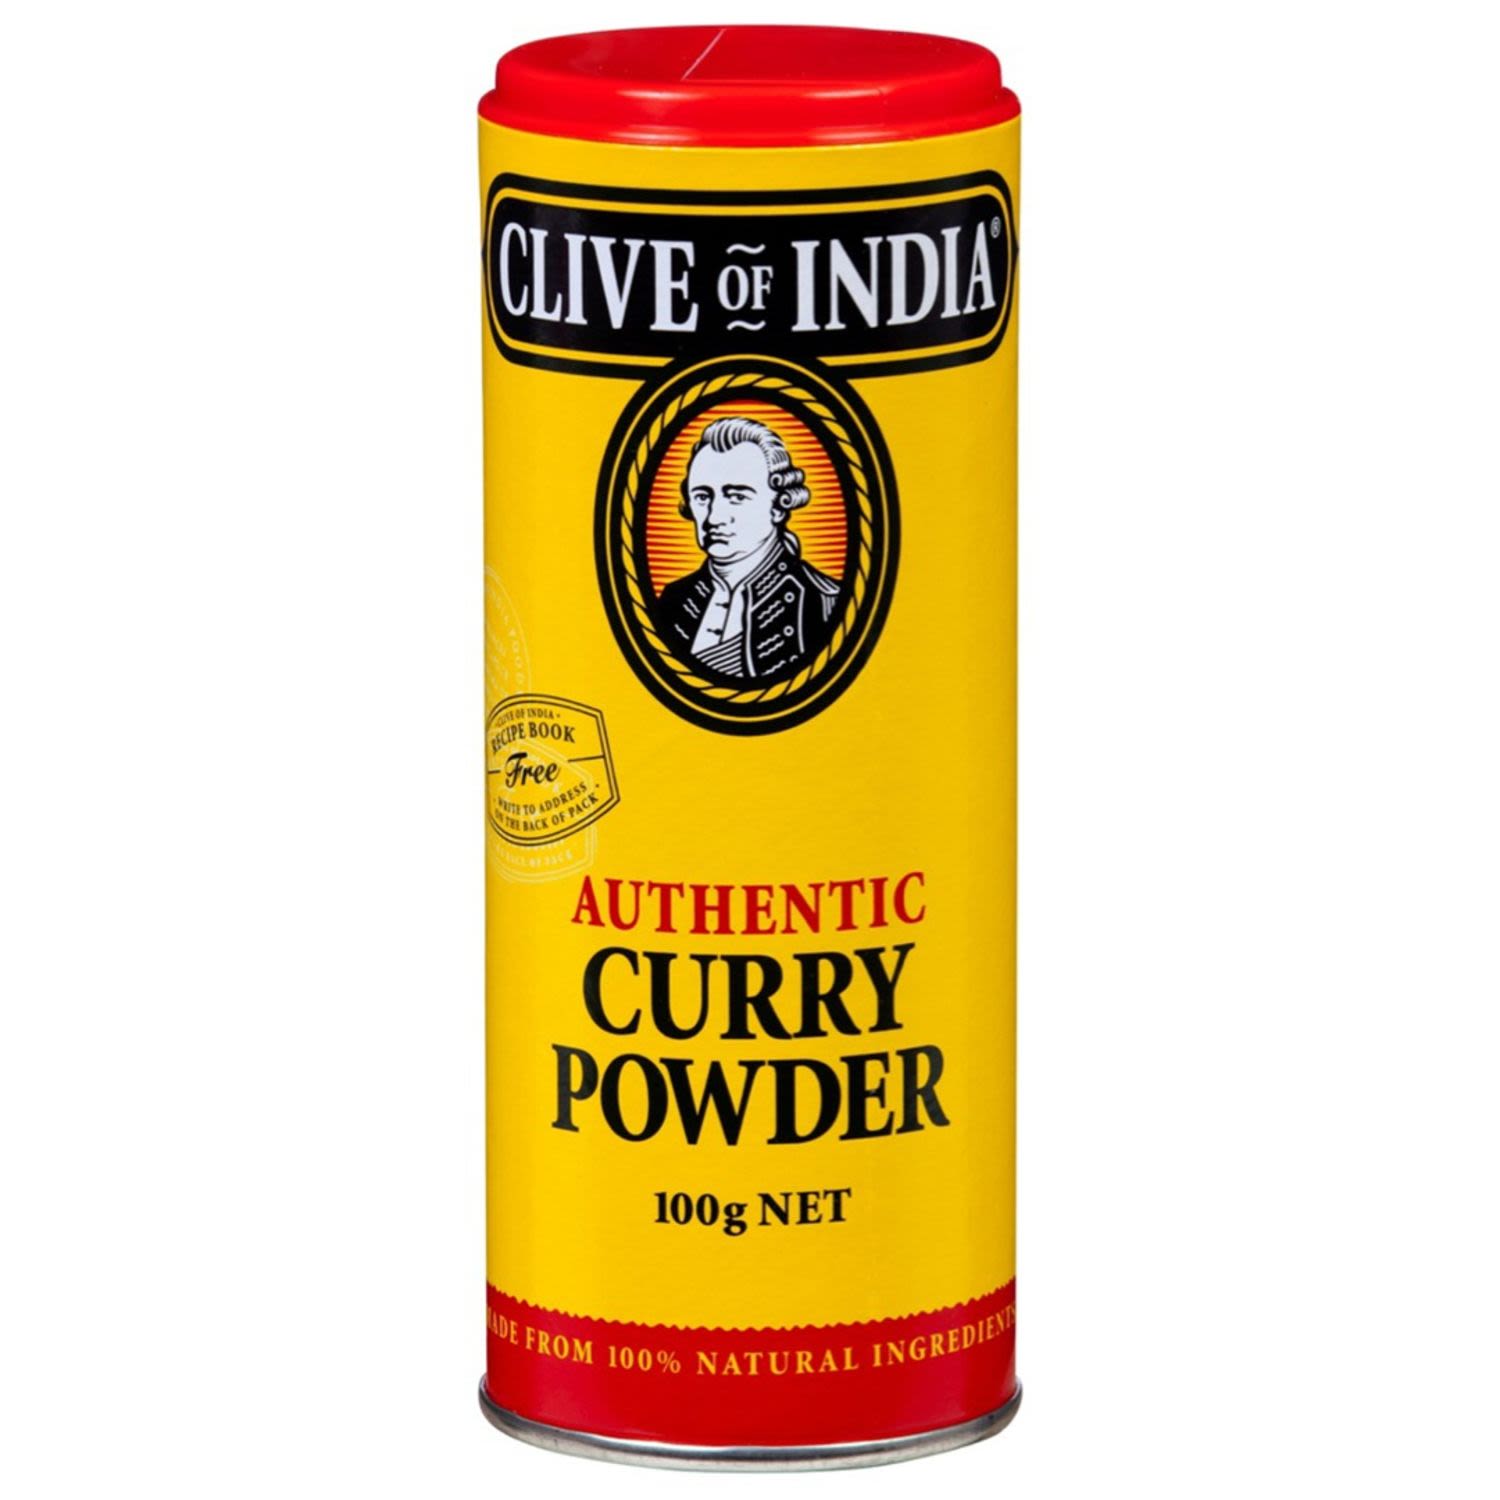 Clive of India Authentic Curry Powder, 100 Gram